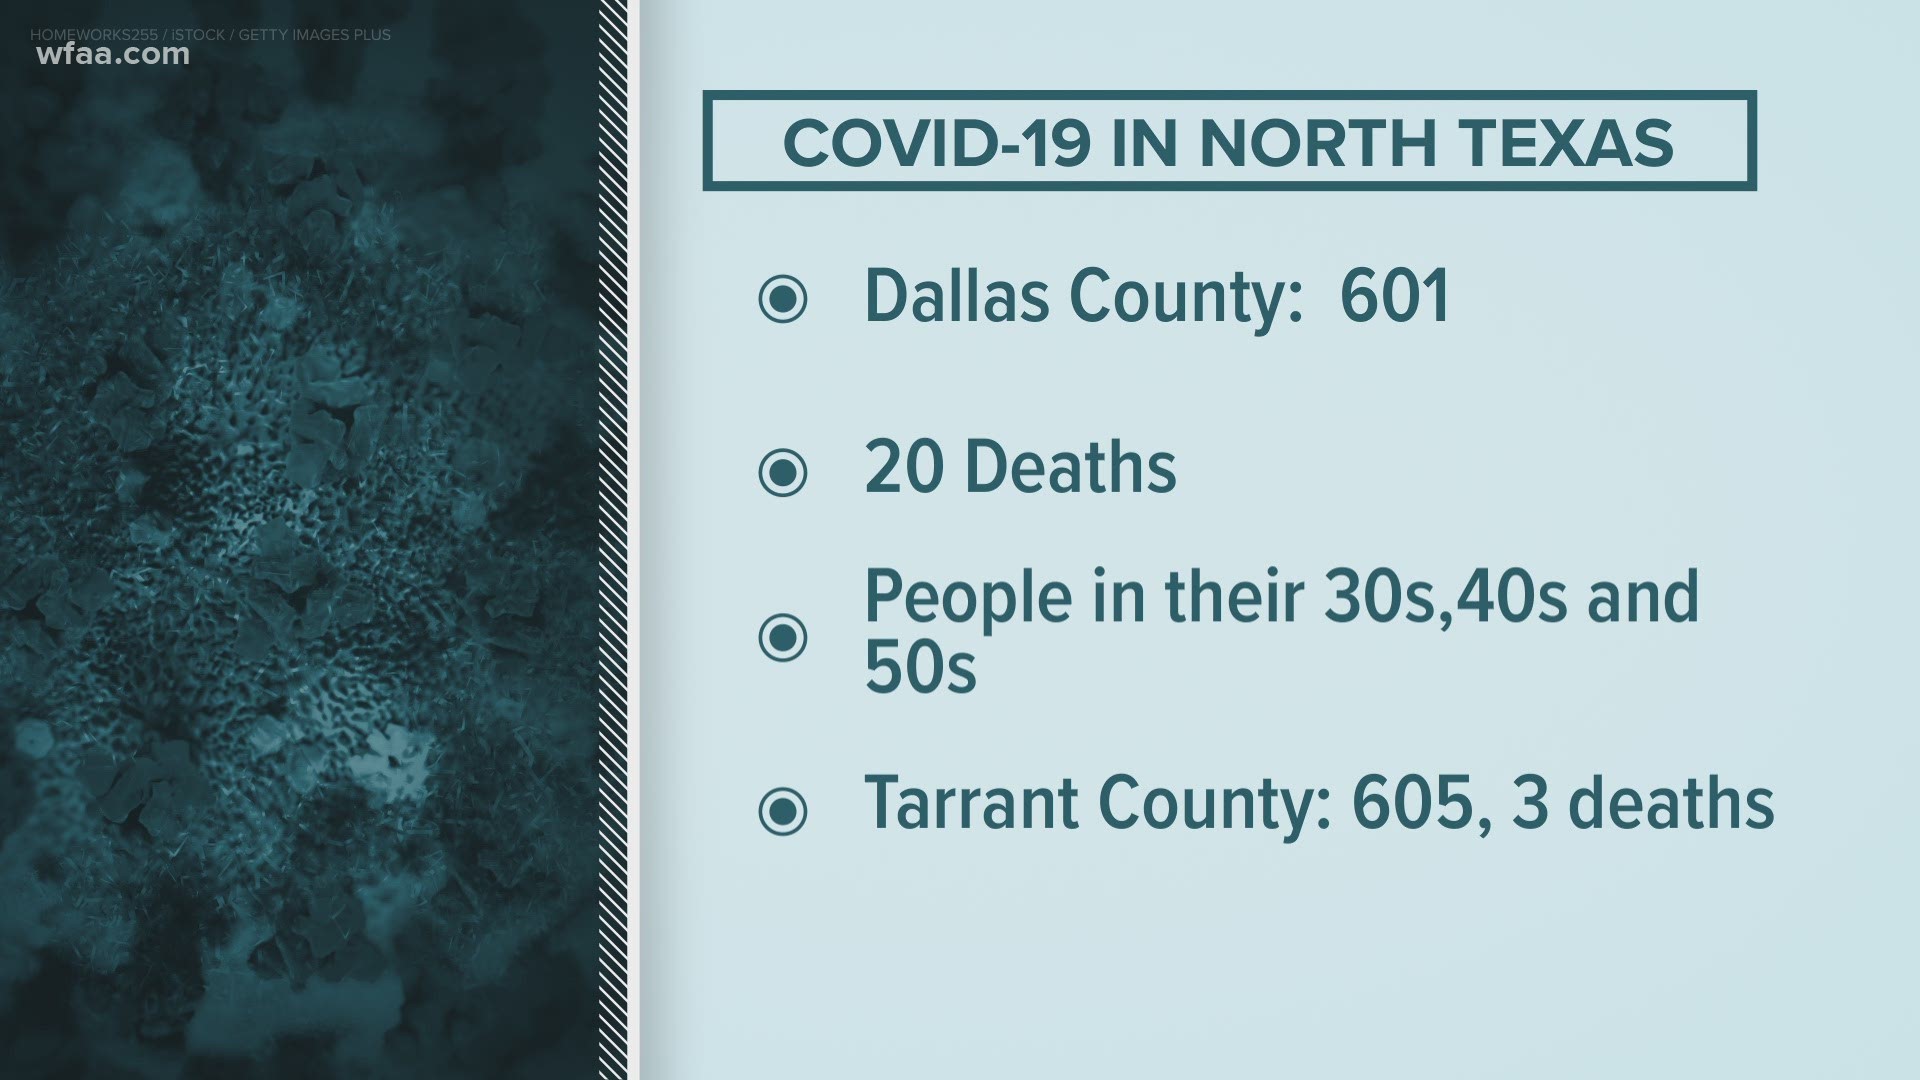 State health officials reported 6,975 new positive cases of COVID-19 Tuesday, which is double what was reported statewide just over a week ago.